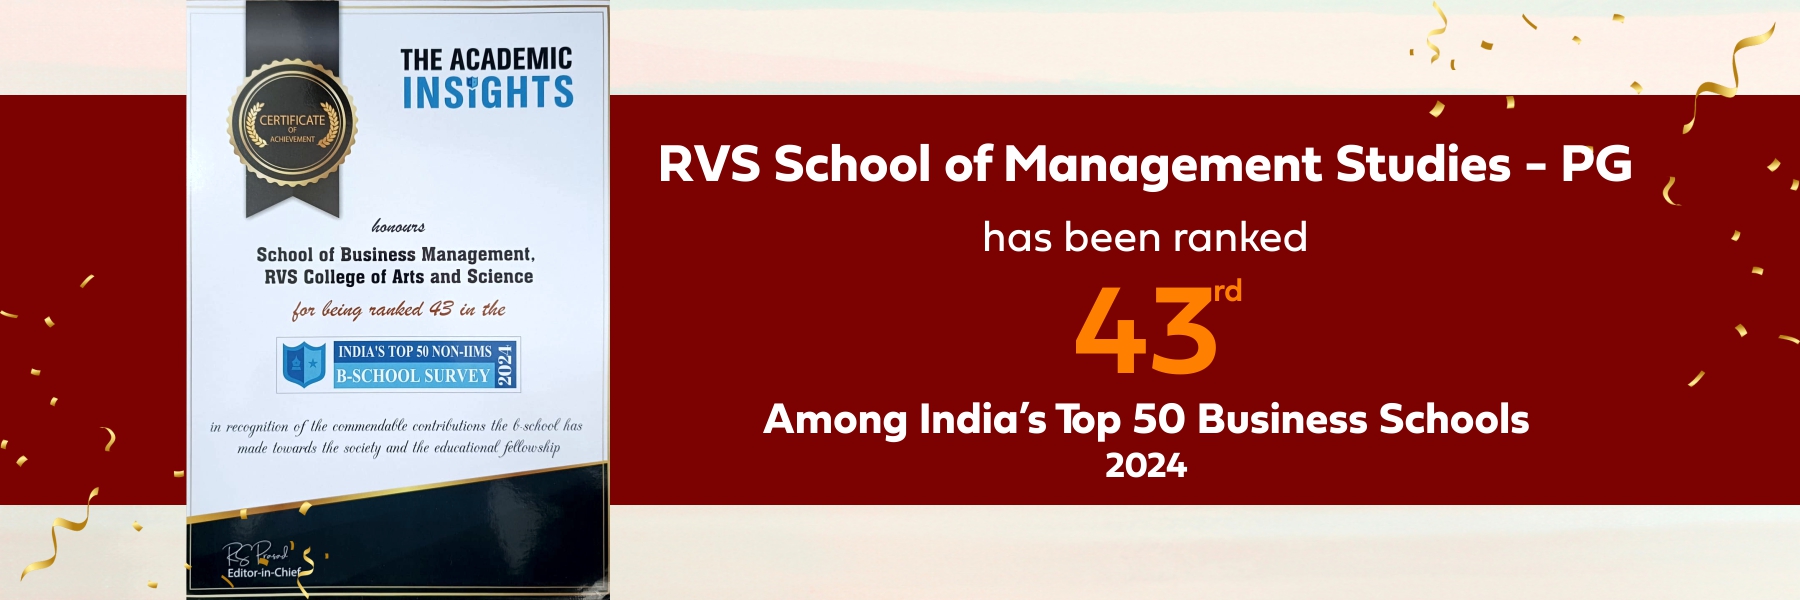 RVS Management Studies has been Ranked 43rd